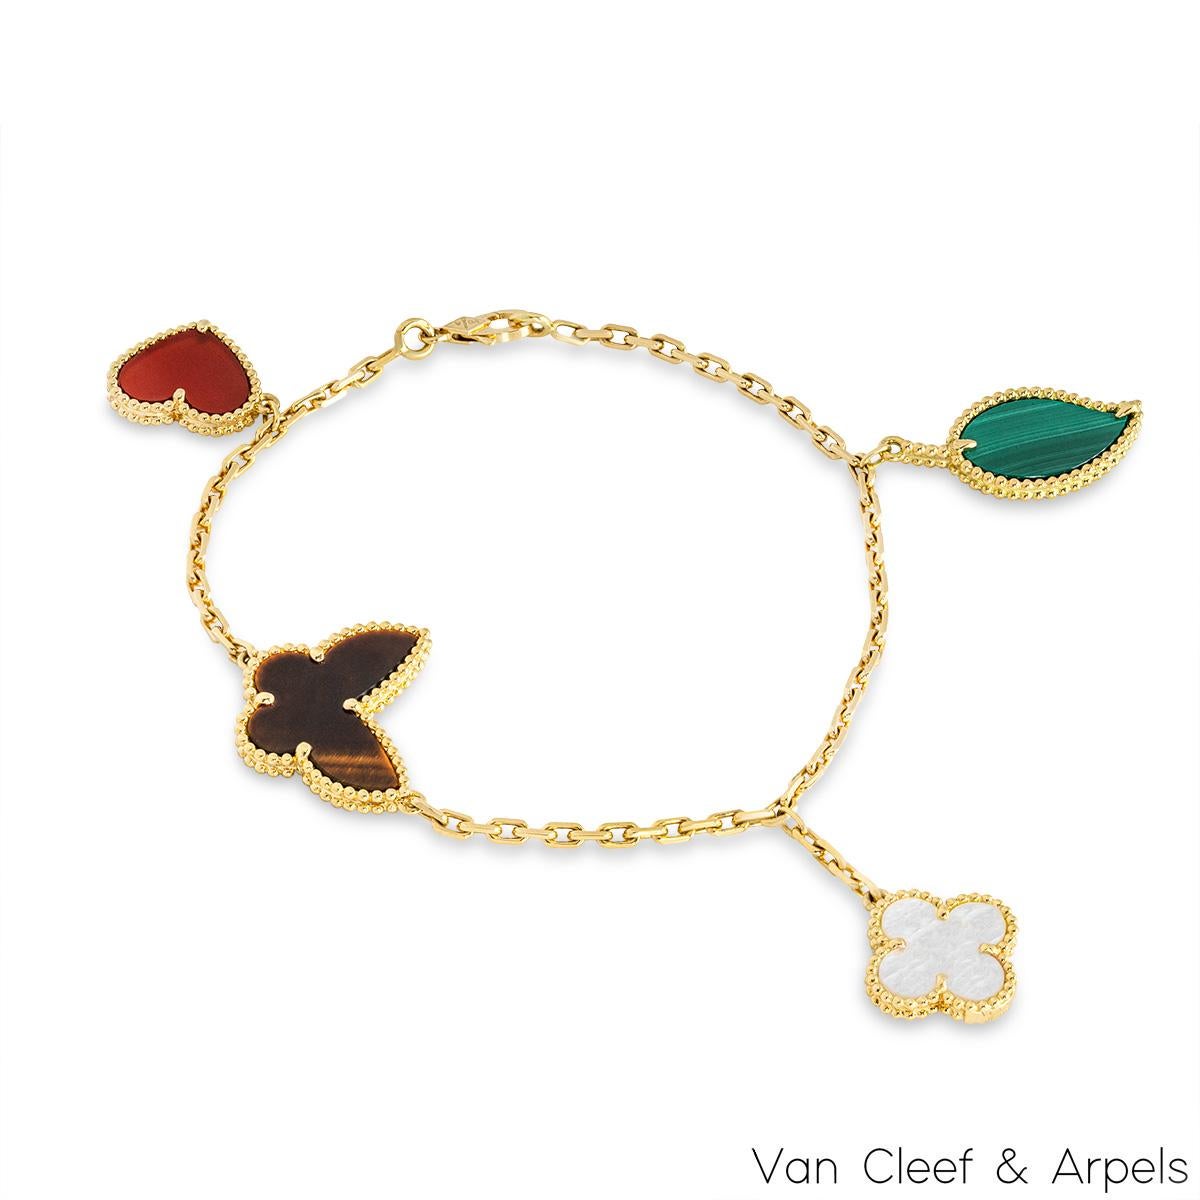 A lovely 18k yellow gold, Lucky Alhambra bracelet by Van Cleef & Arpels. The bracelet features a malachite leaf motif, a mother of pearl clover motif, a tiger's eye butterfly motif and a carnelian heart motif. Measuring 7.5 inches in length, the